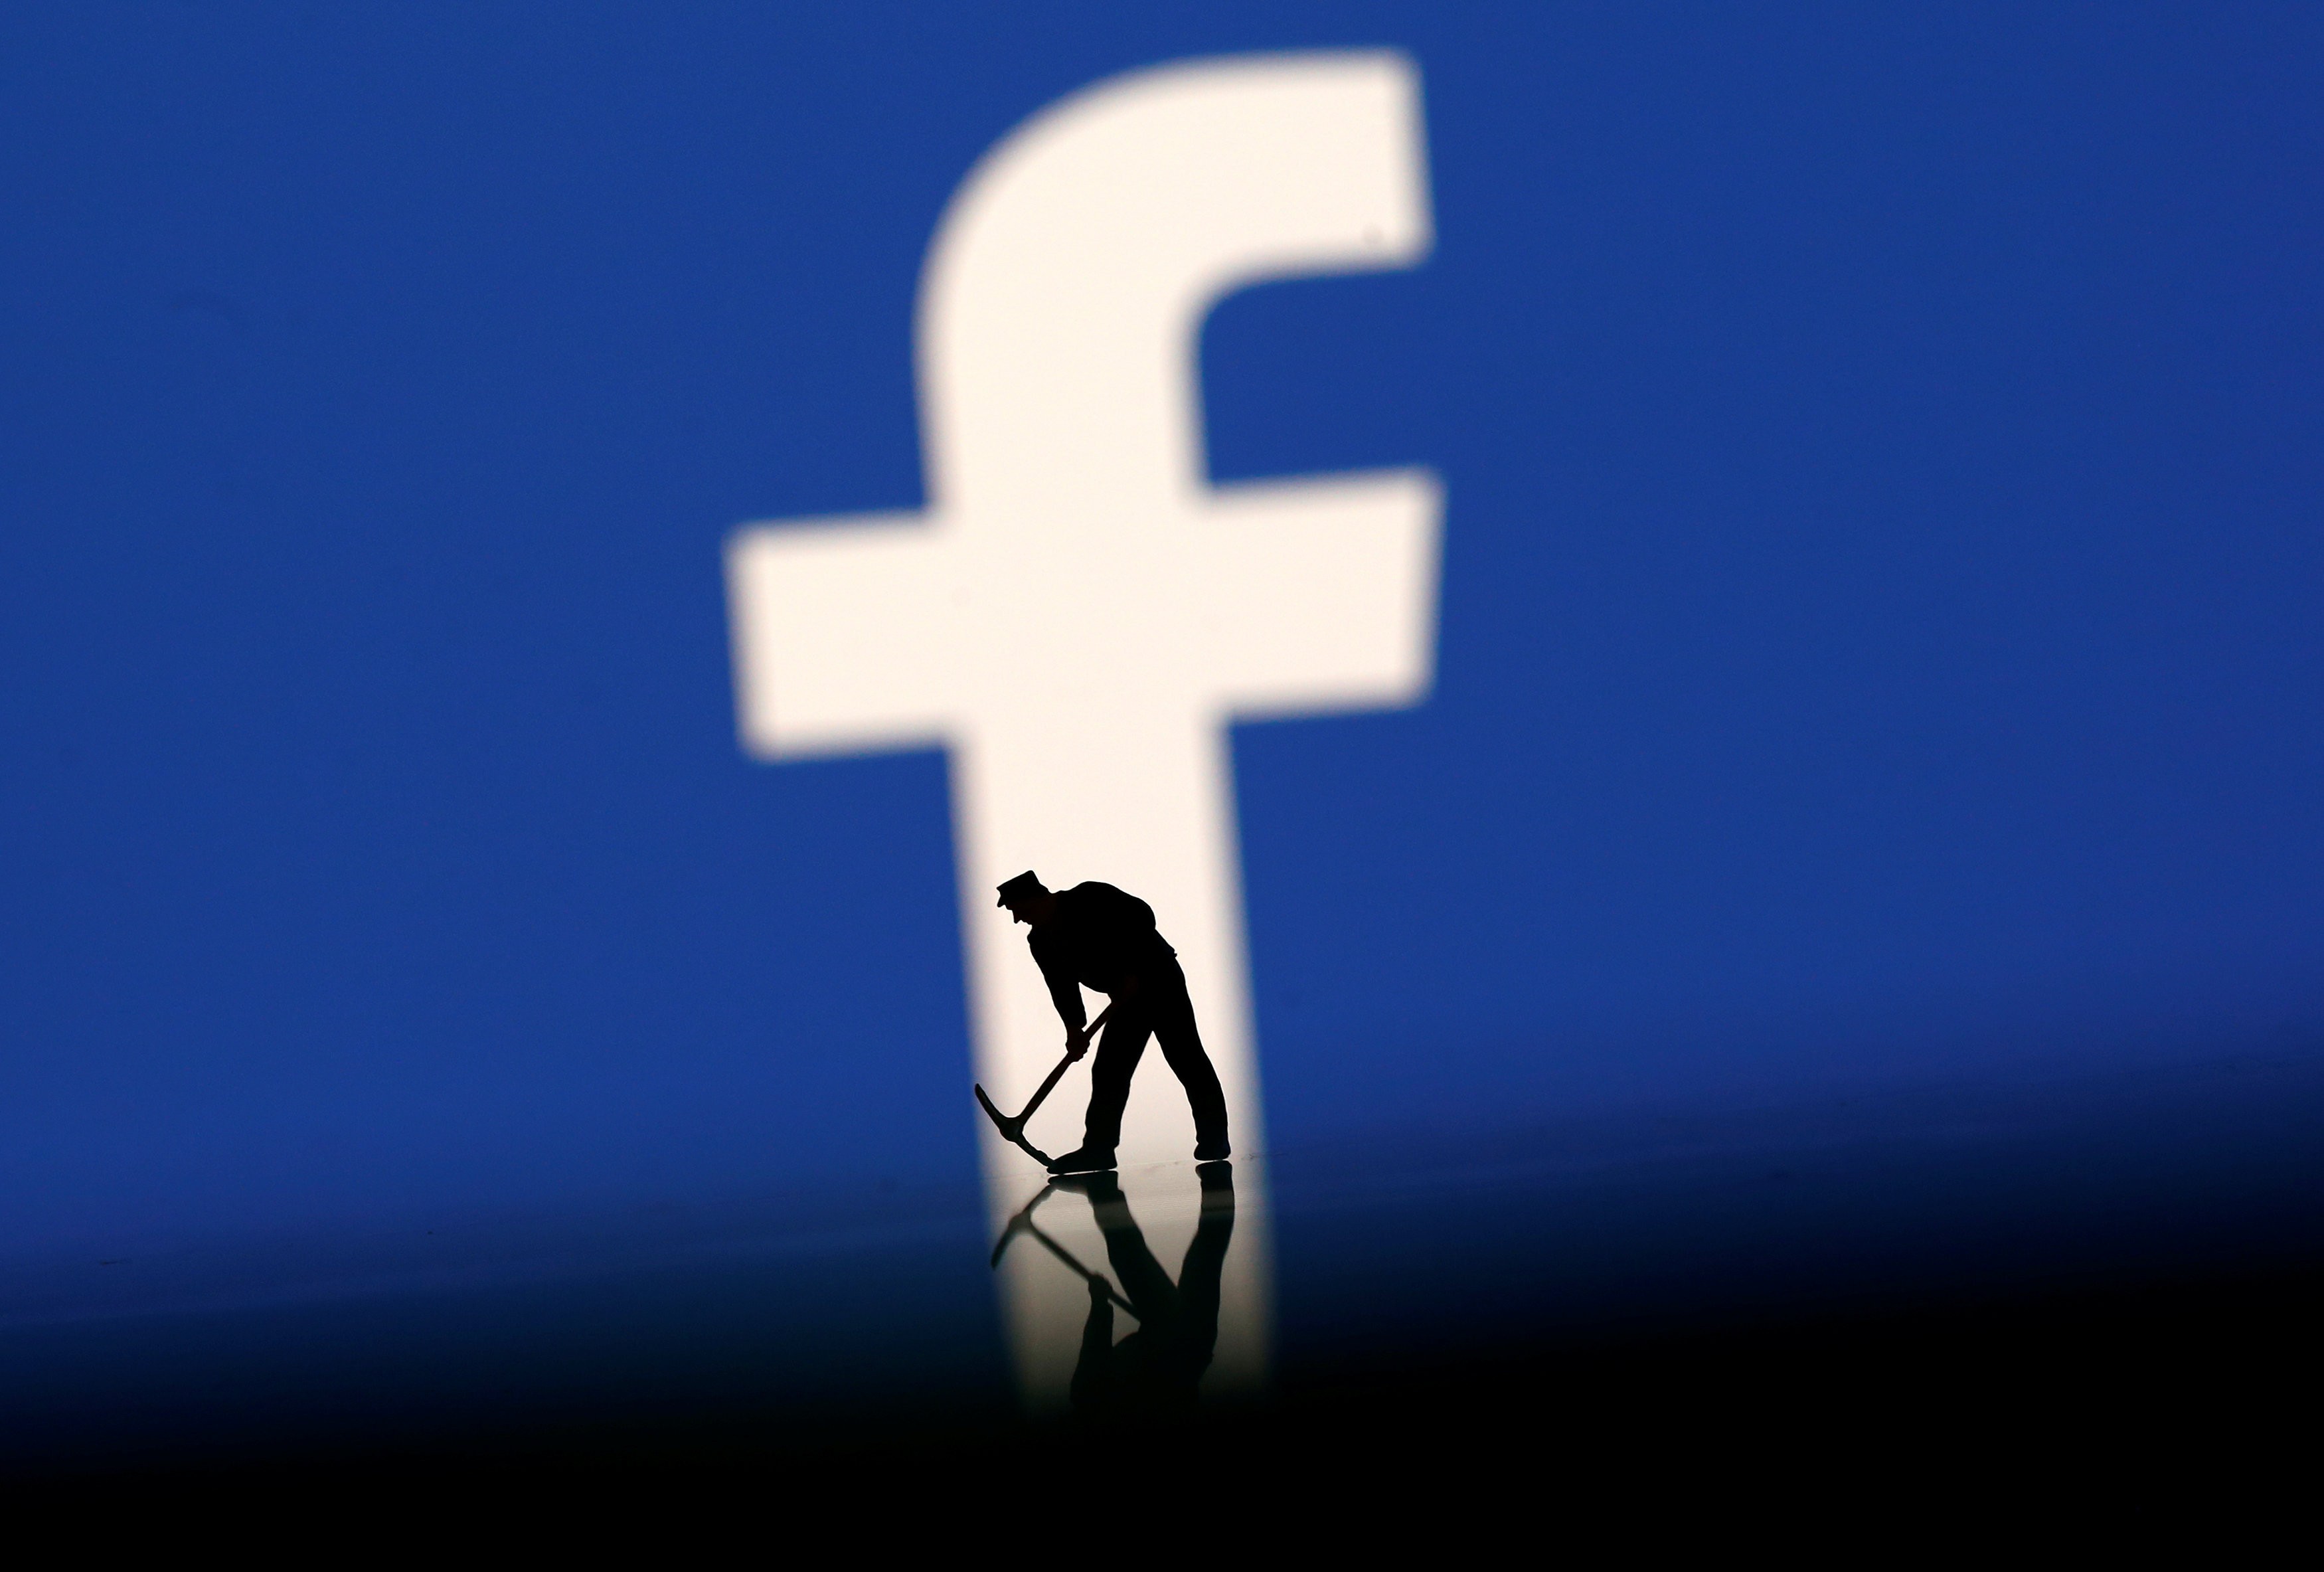 The laws governing data privacy from years ago may be outdated in the age of Facebook, with it ability to gather remarkably complete profiles of its users. Photo: Reuters